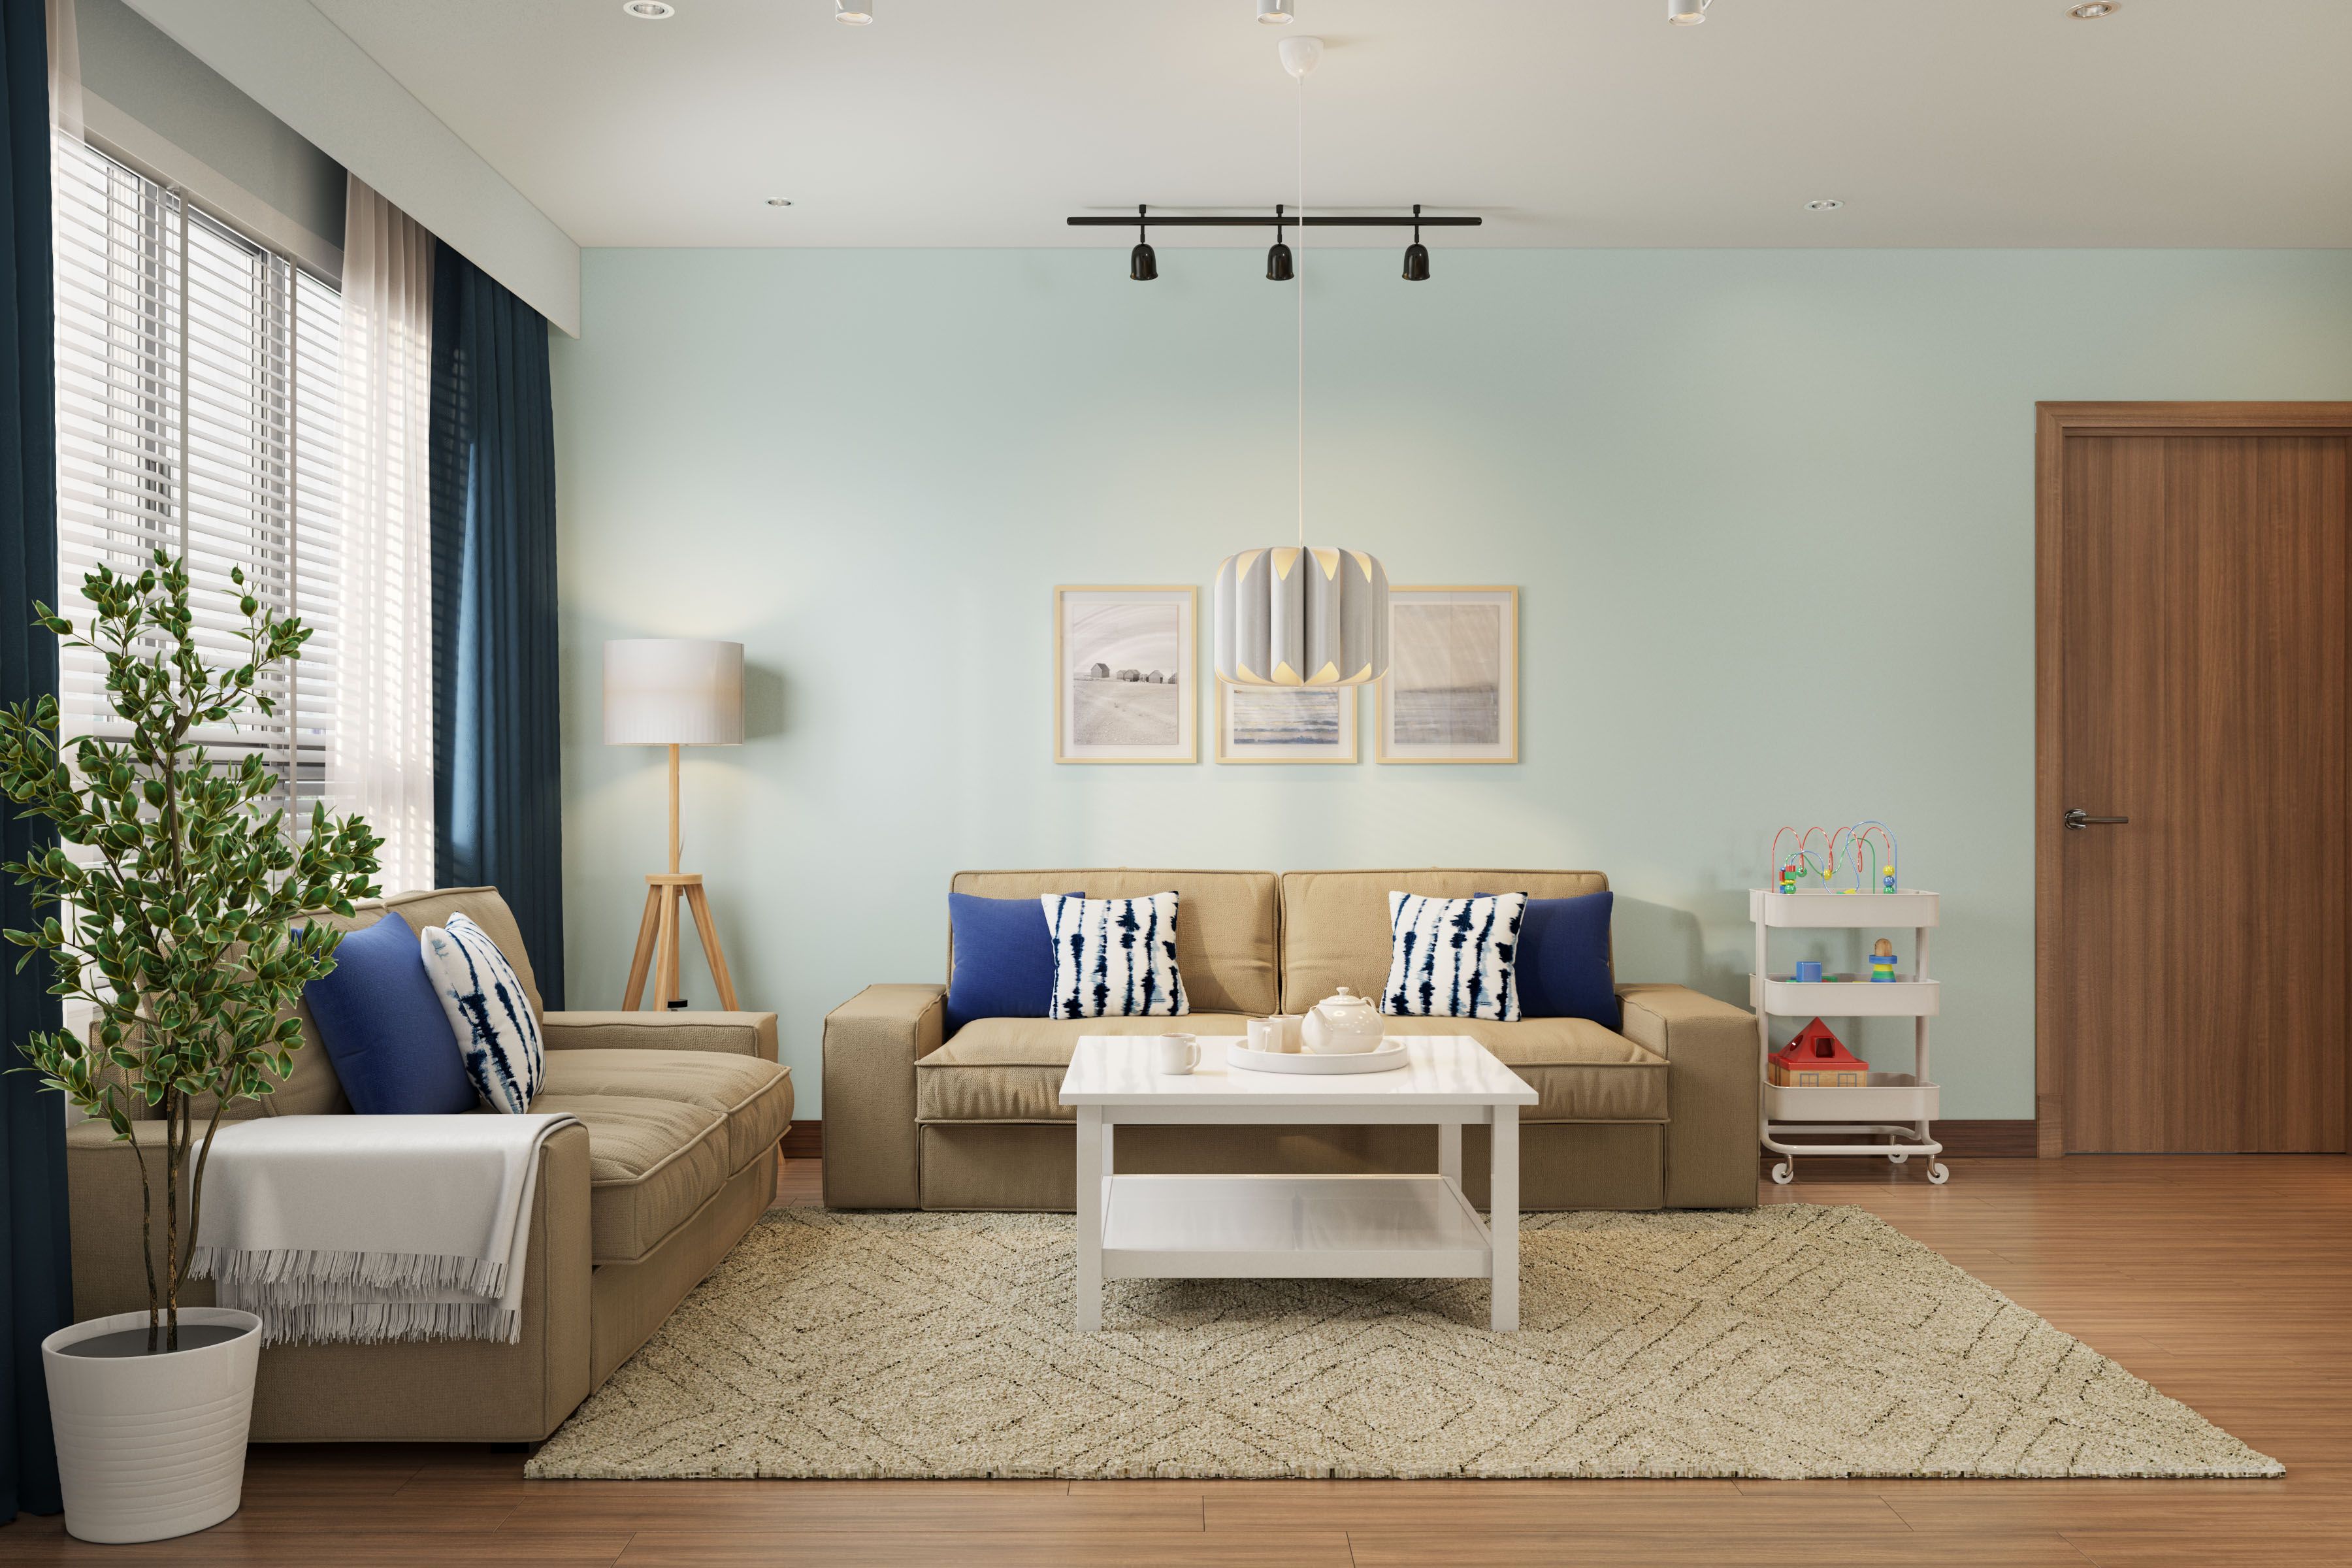 Convenient Pastel-Toned Living Room Design In An L-Shaped Layout